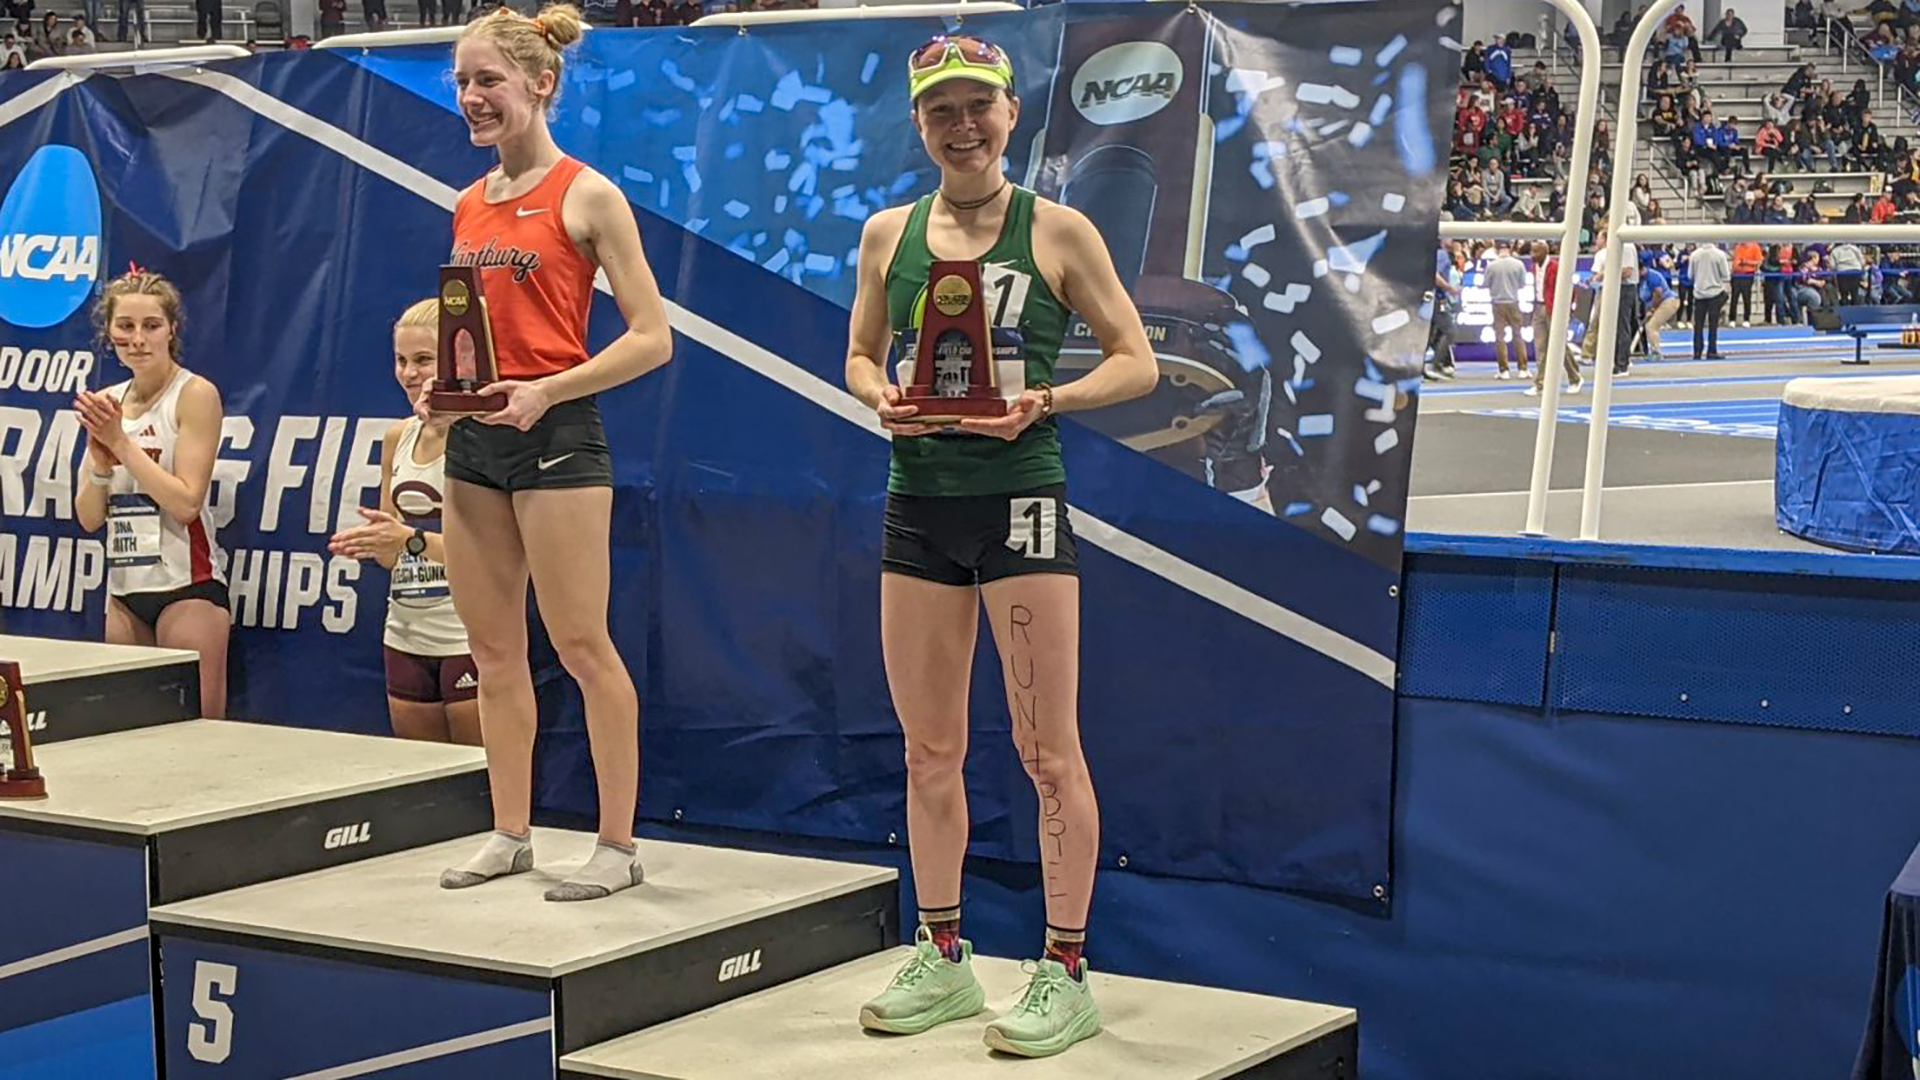 Duncan Lowers Program Record and Becomes 3000 Meter Run All-American